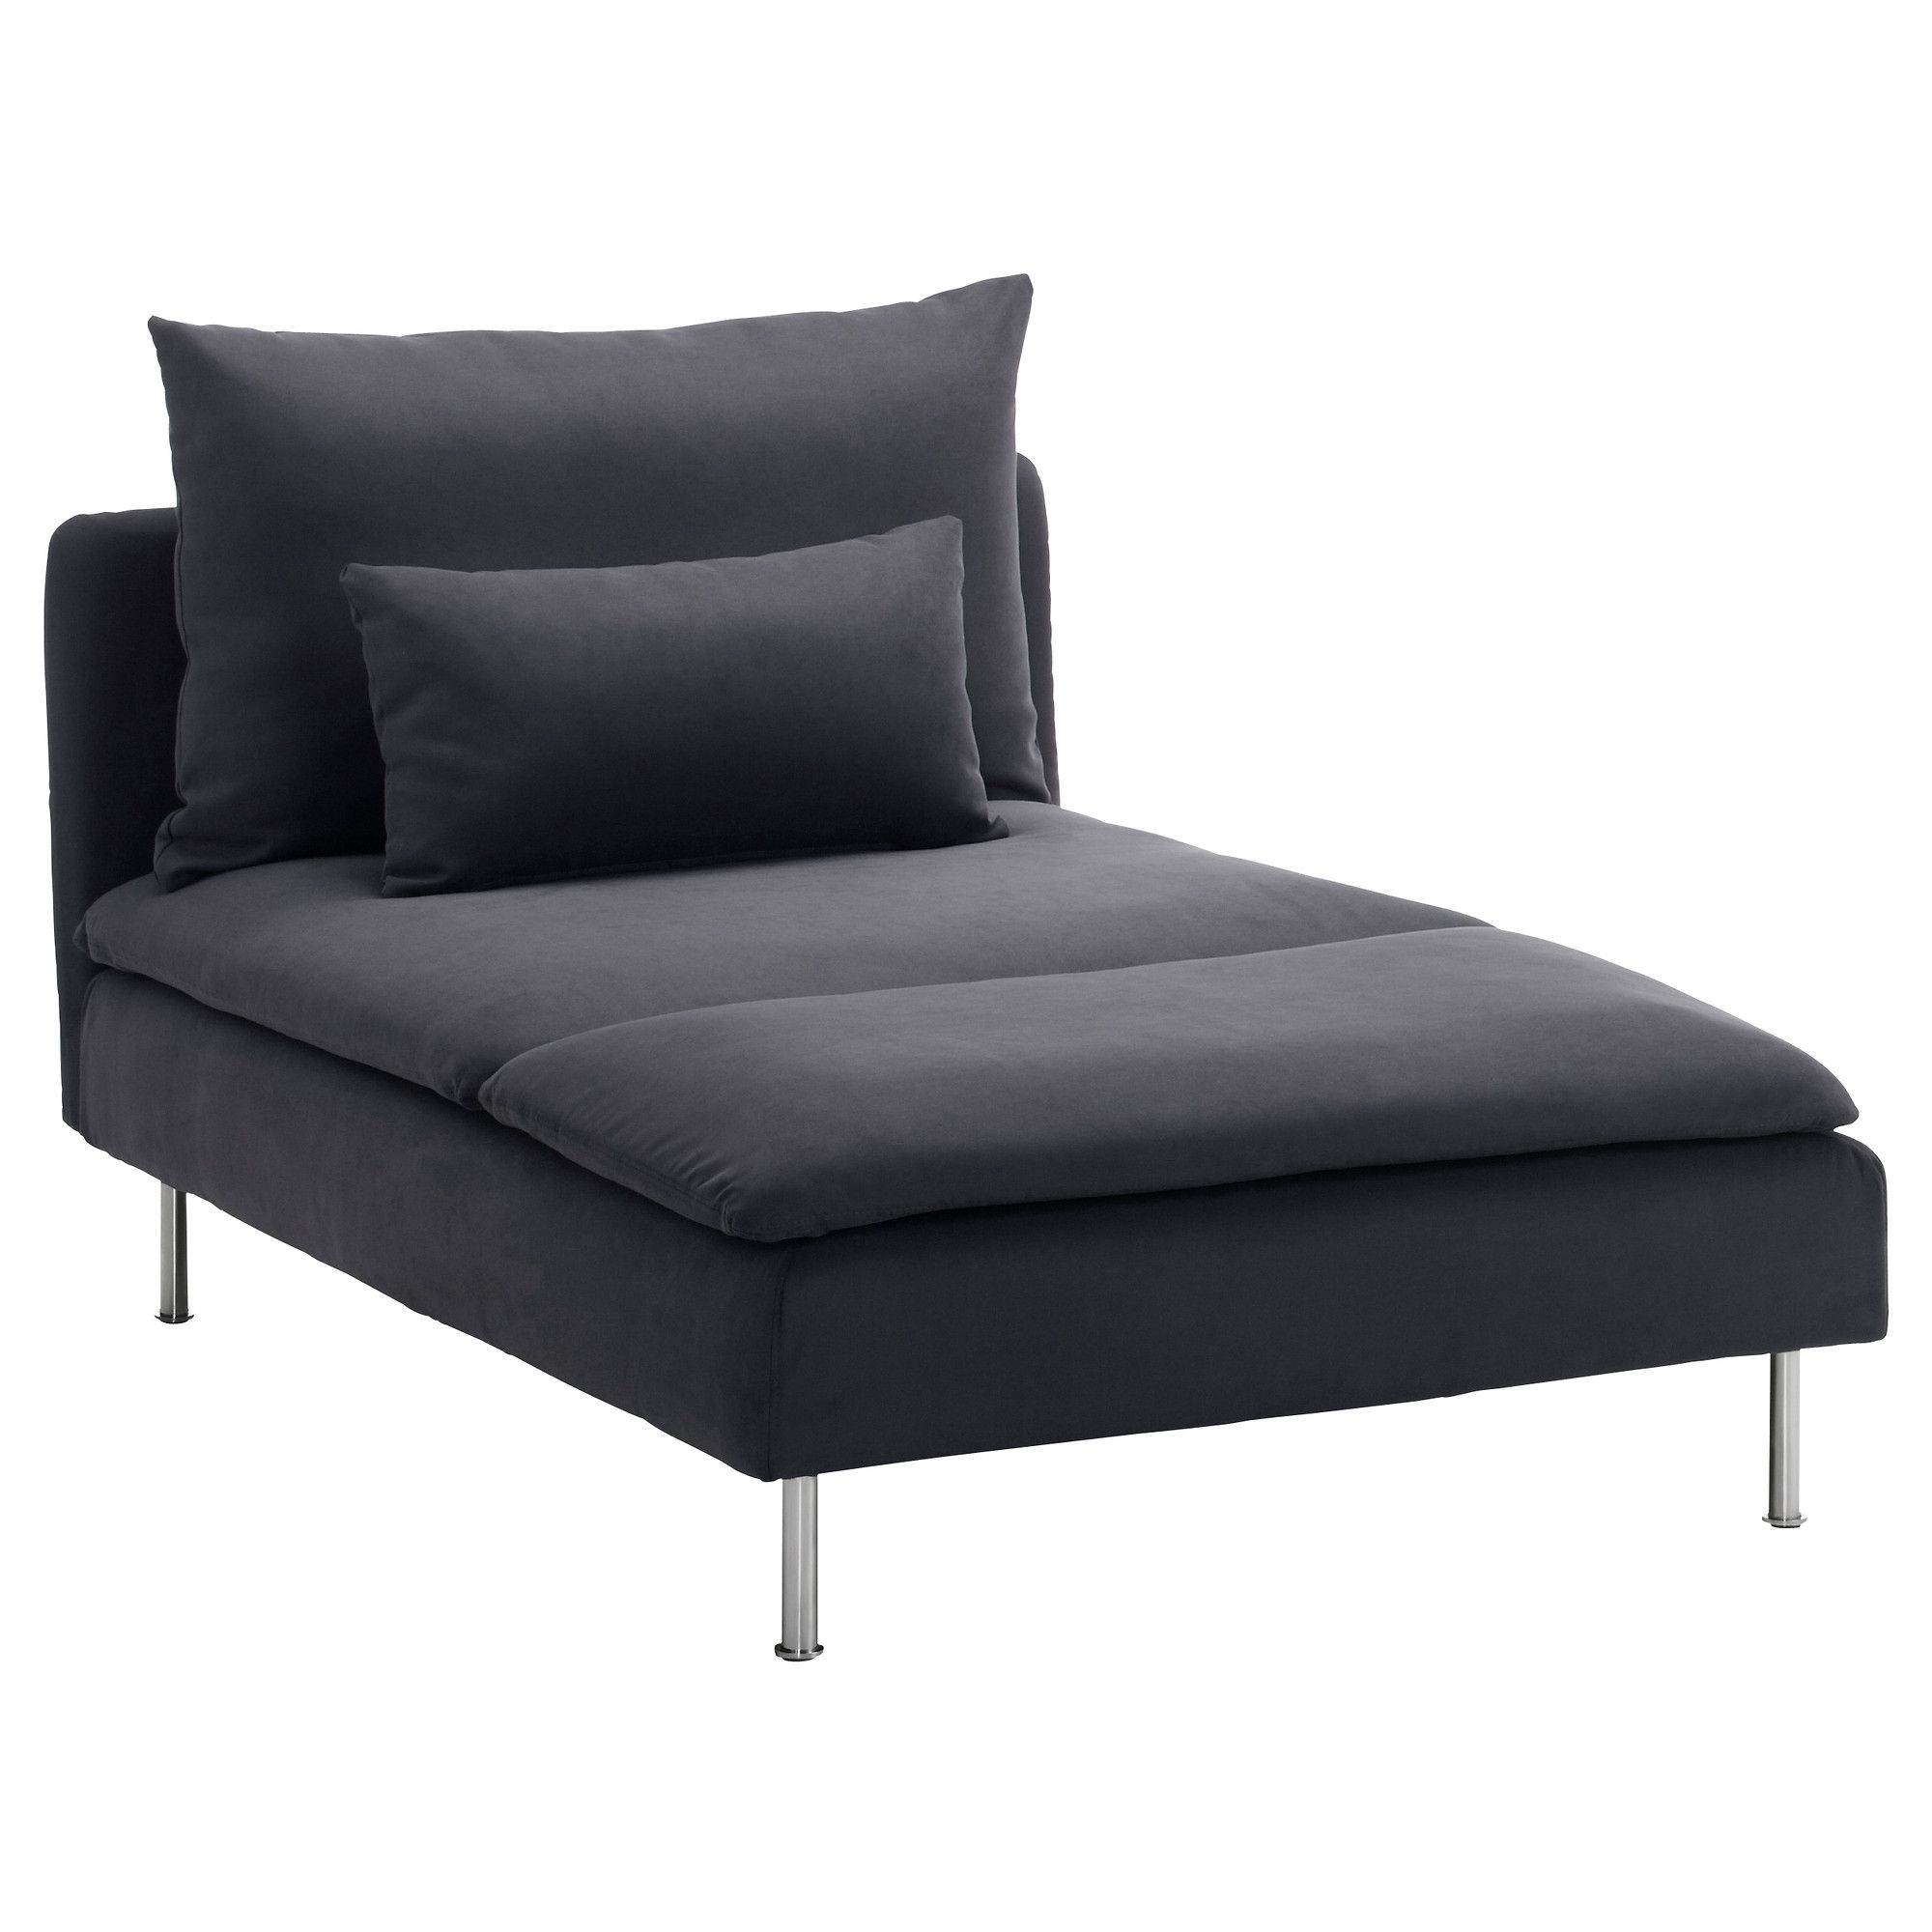 Current Söderhamn Chaise – Samsta Dark Gray – Ikea Pertaining To Gray Chaise Lounges (View 7 of 15)